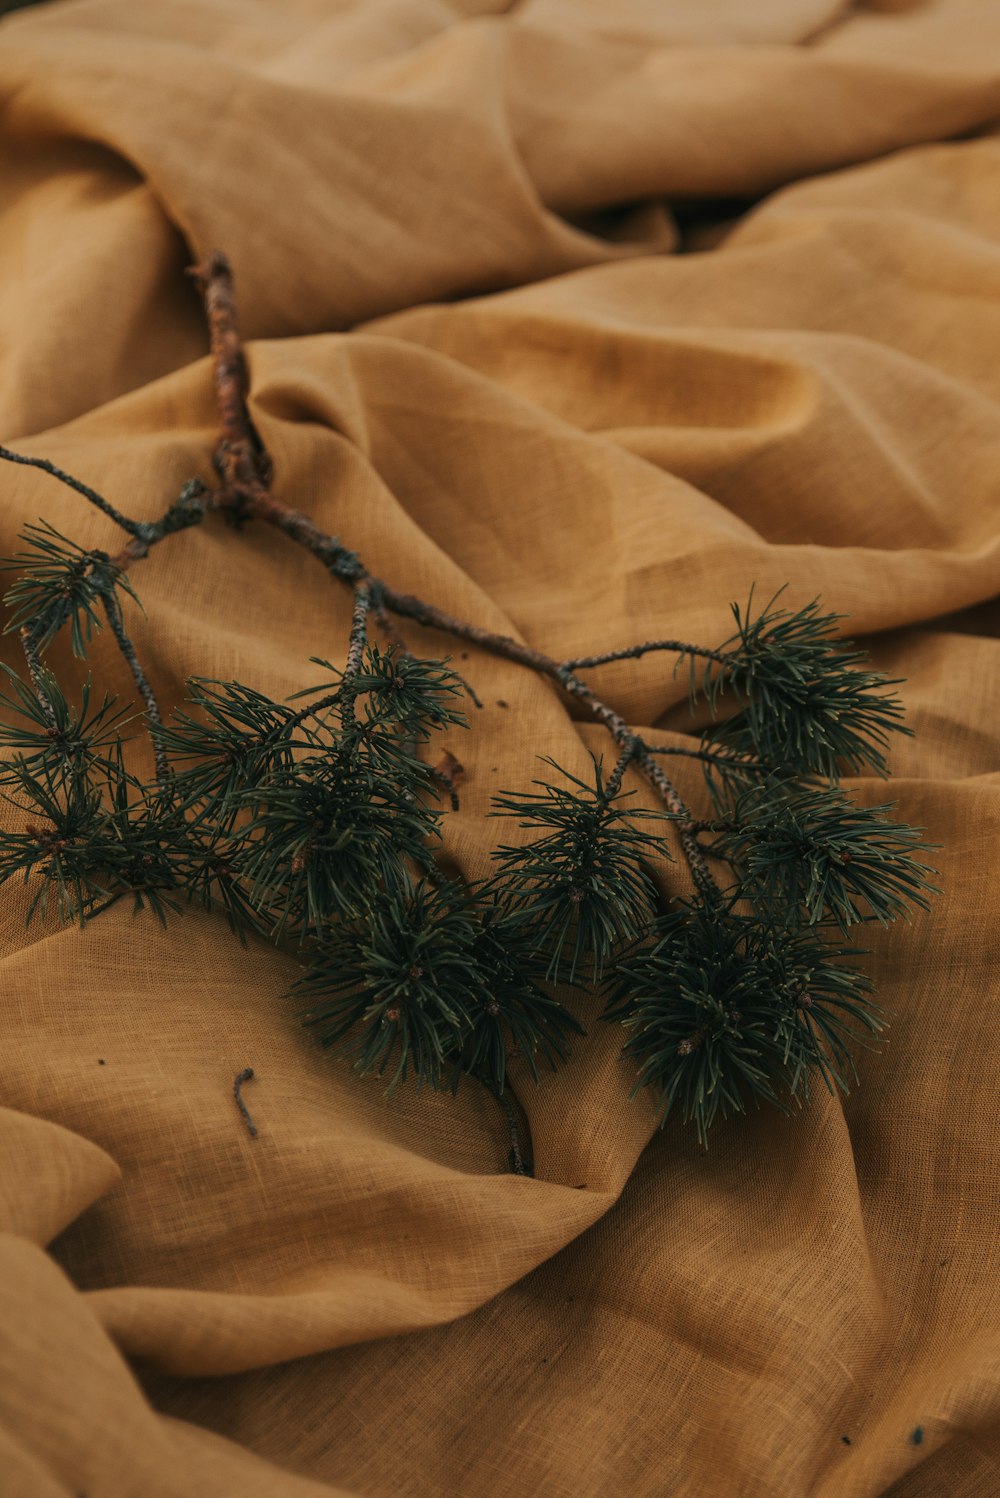 a close up of a tree branch on a cloth